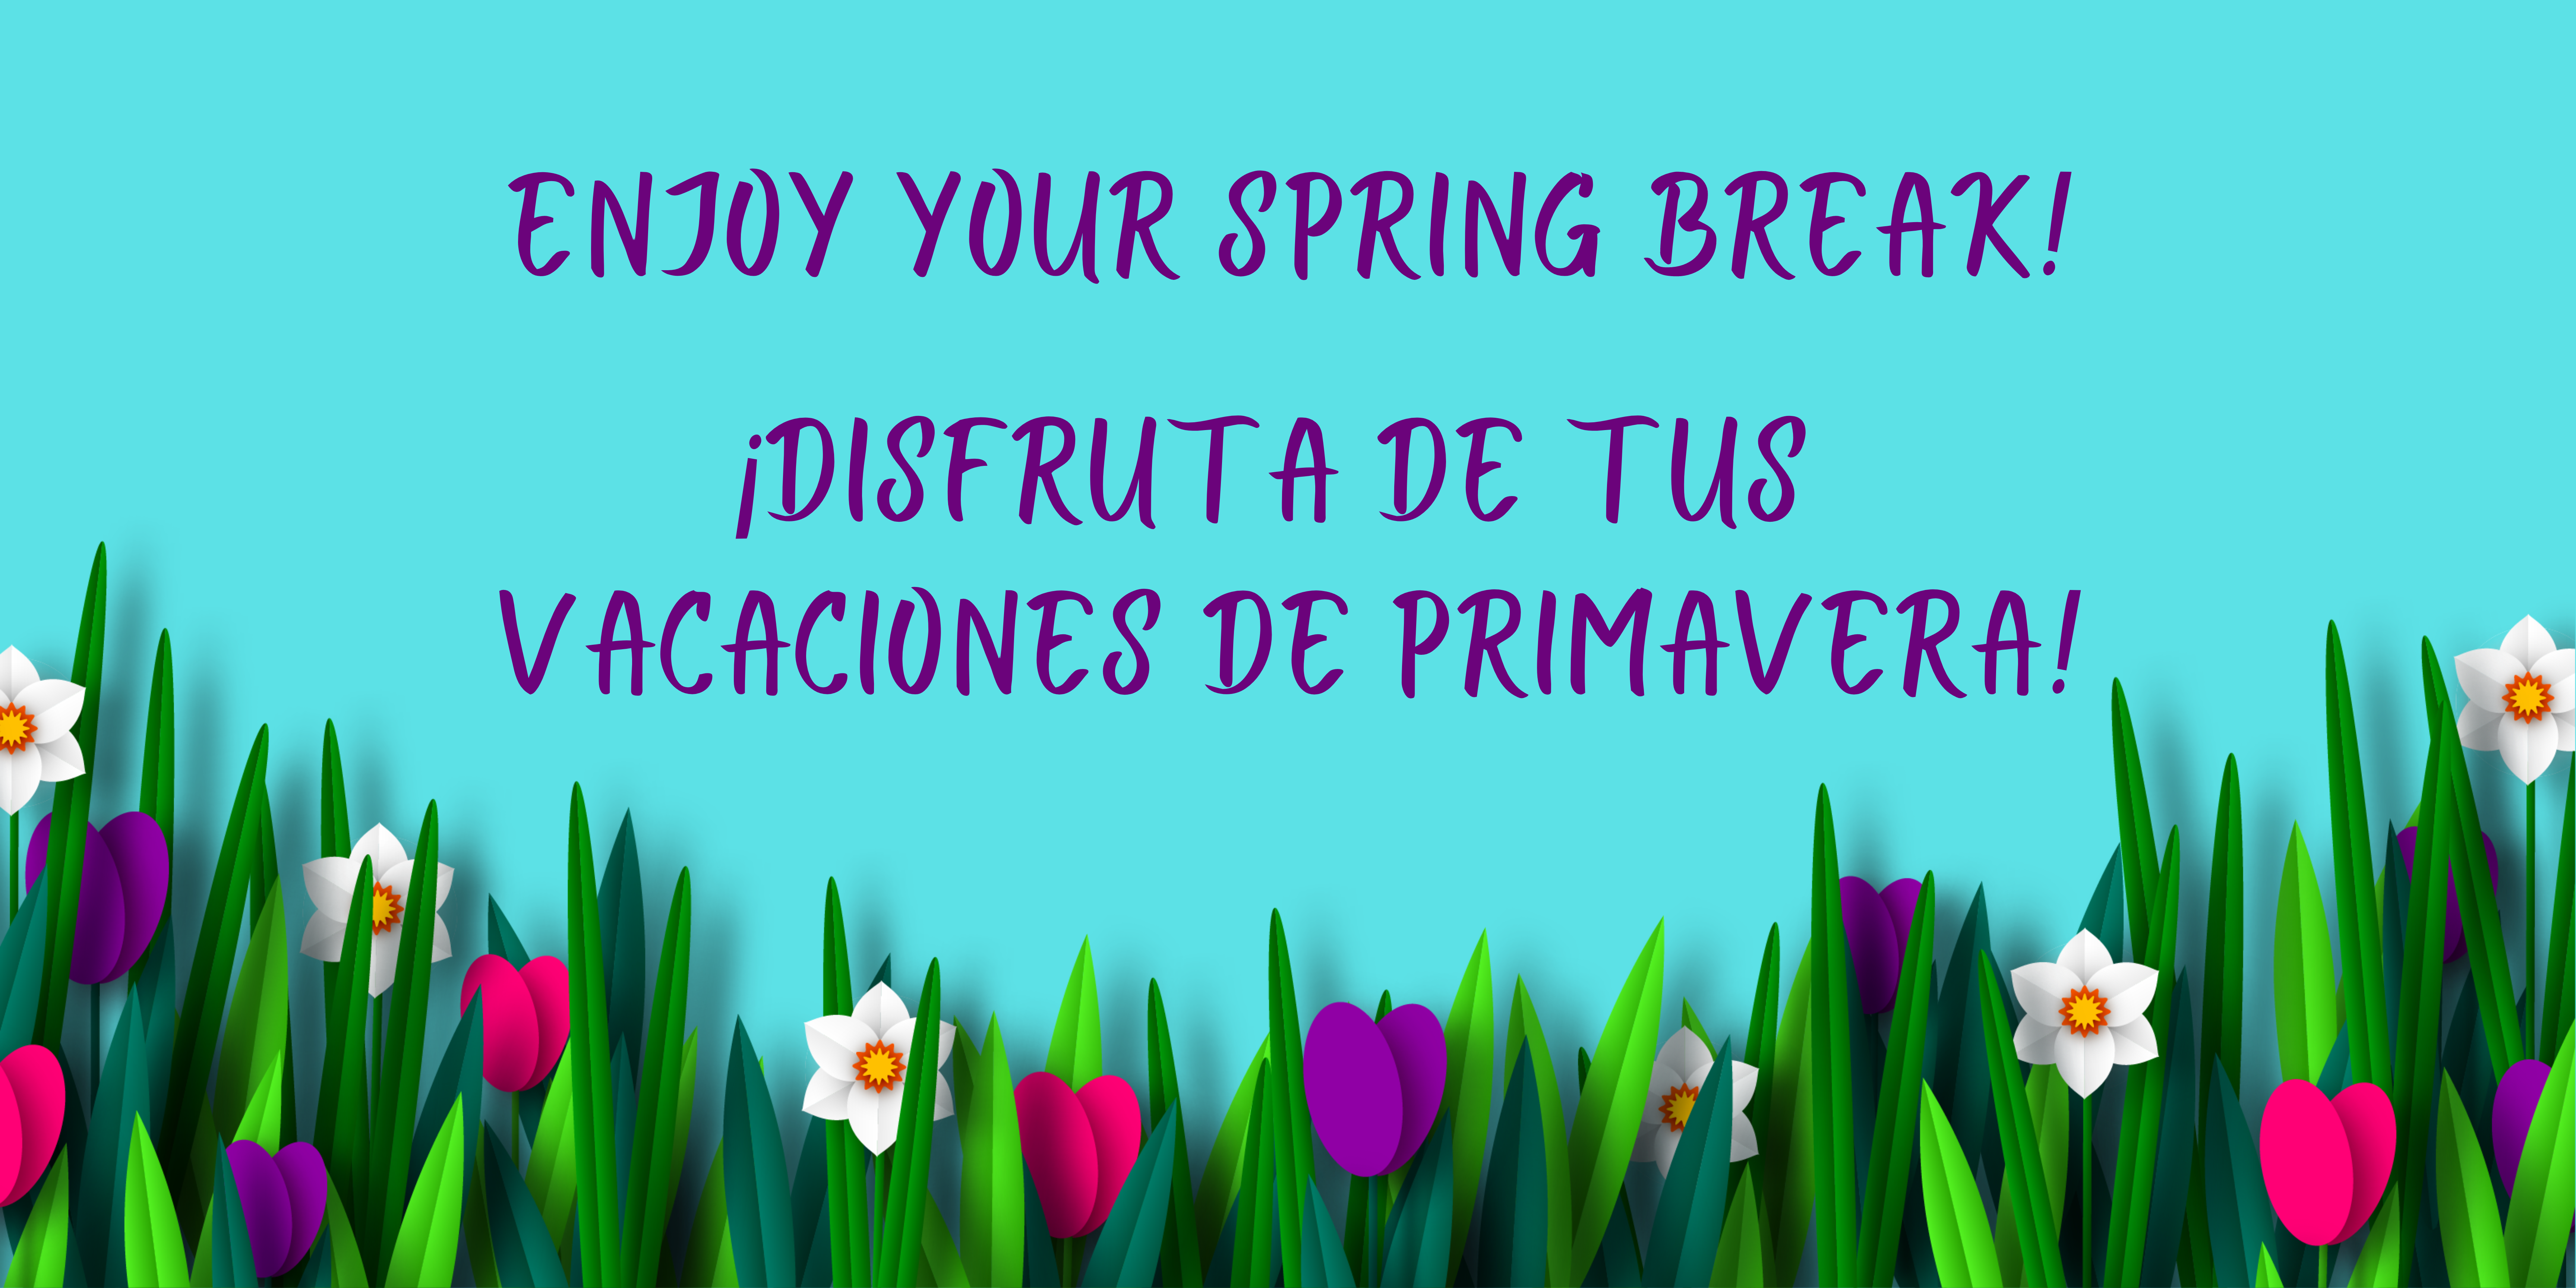 Sky blue background with graphics of white red, and purple flowers and green grass along the bottom. Purple text says, "Enjoy your Spring Break! ¡Disfruta de tus vacaciones de primavera!"